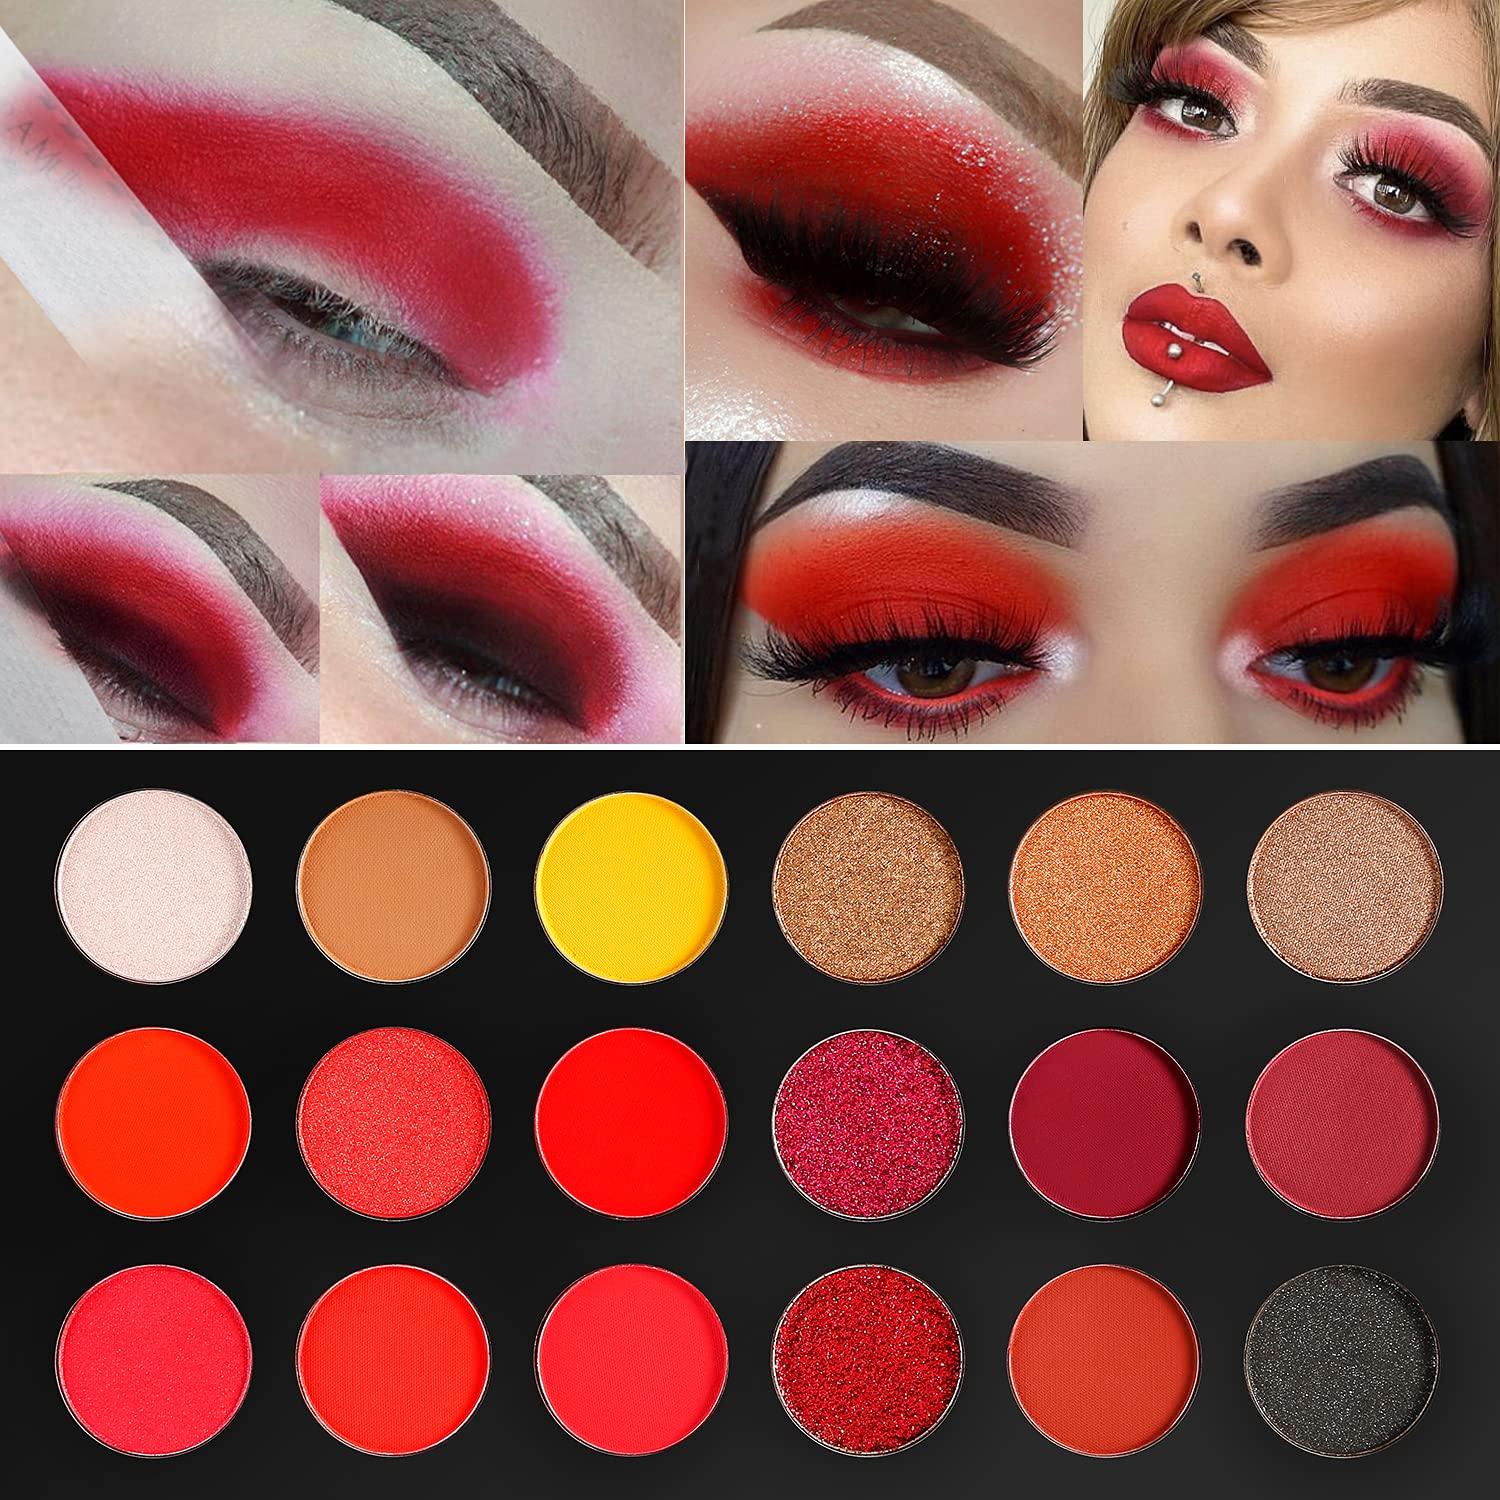 Red Eyeshadow Palette Highly Pigmented, AFFLANO Long Lasting True